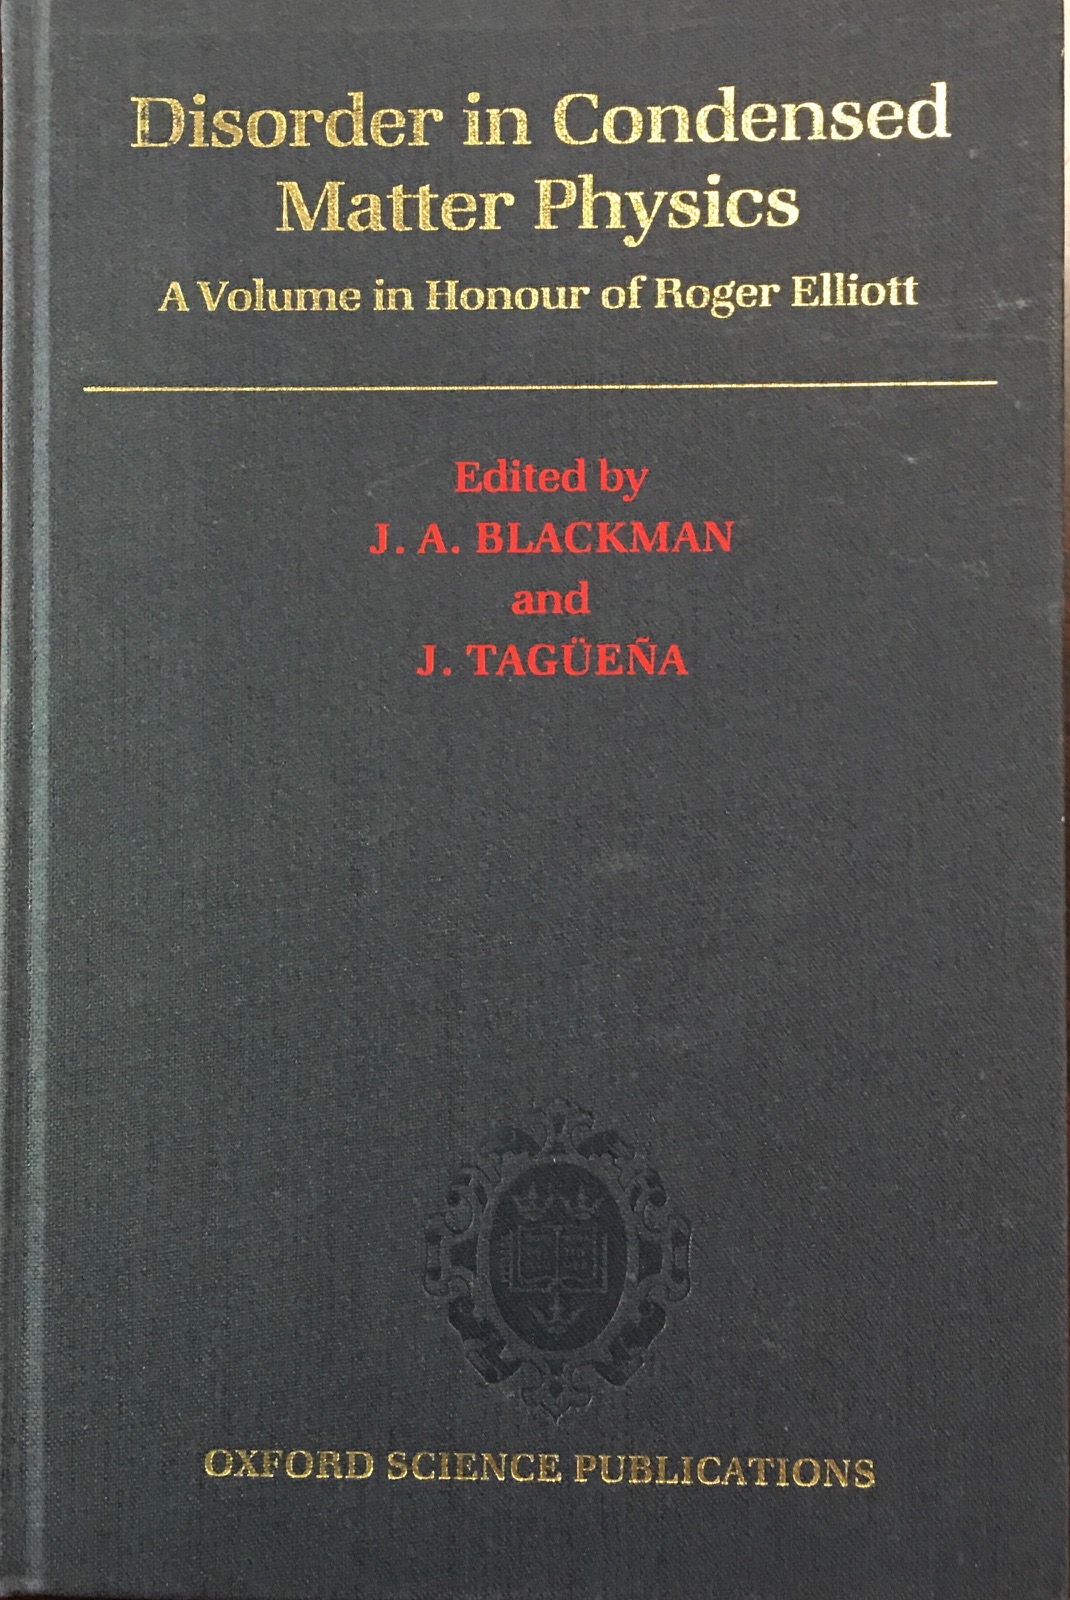 Image for Disorder in Condensed Matter Physics: A Volume in Honor of Roger Elliott (Oxford Science Publications)